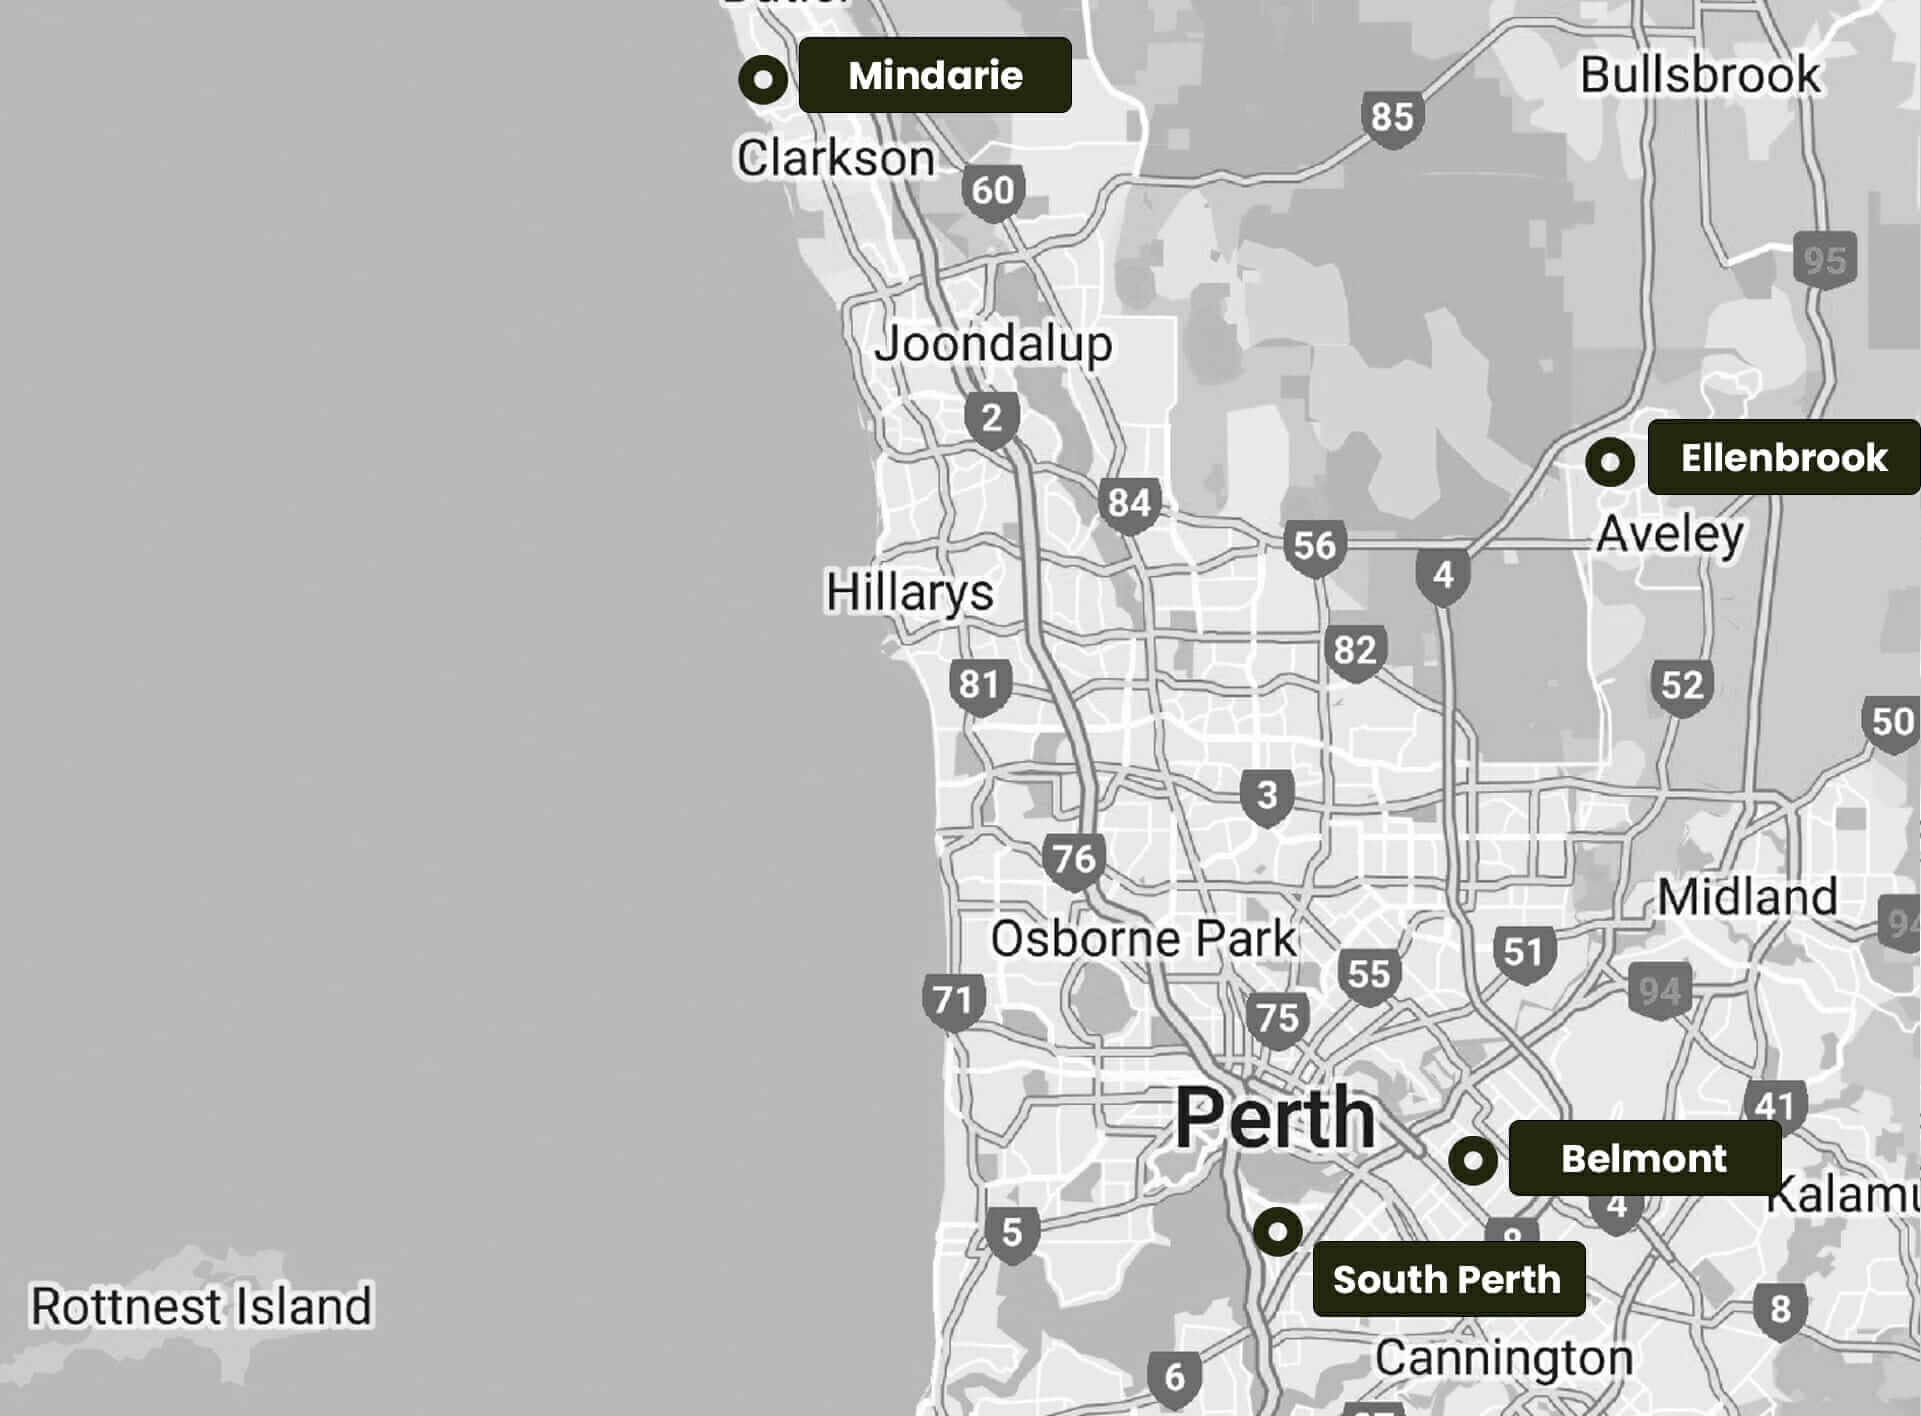 clinics on the map of Perth